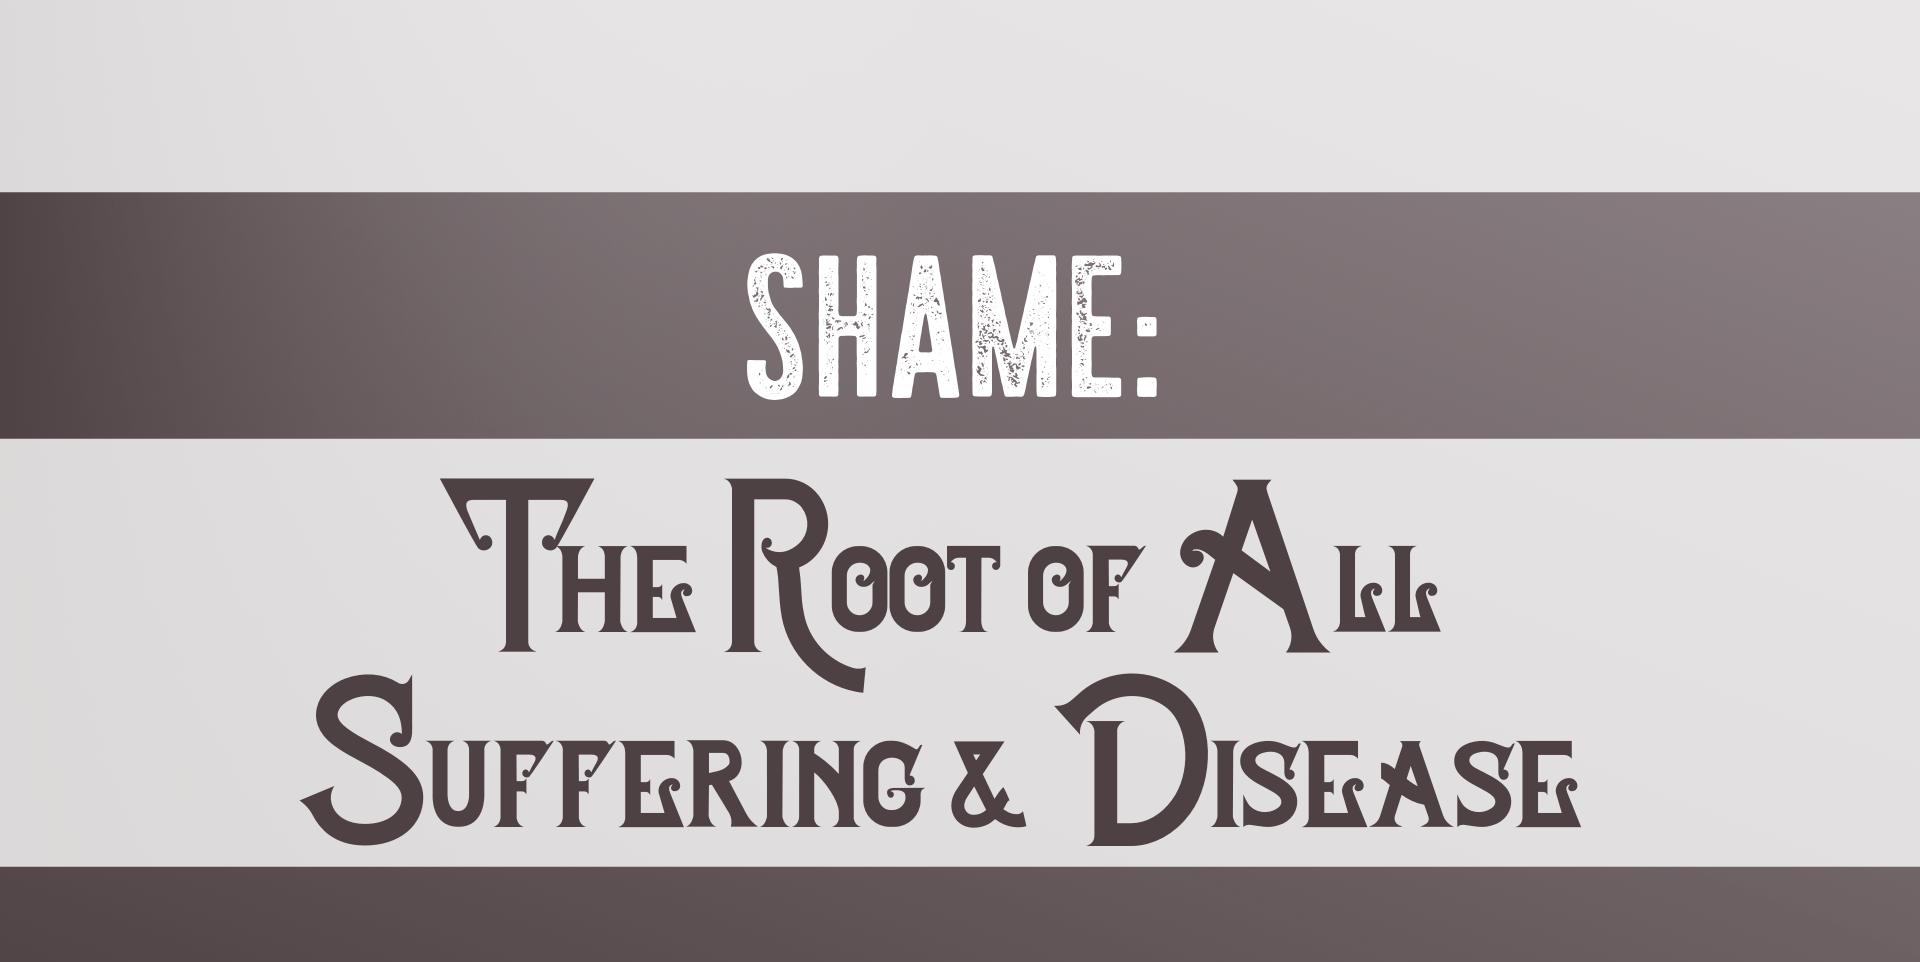 Shame: The Root of All Dis-Ease and Suffering